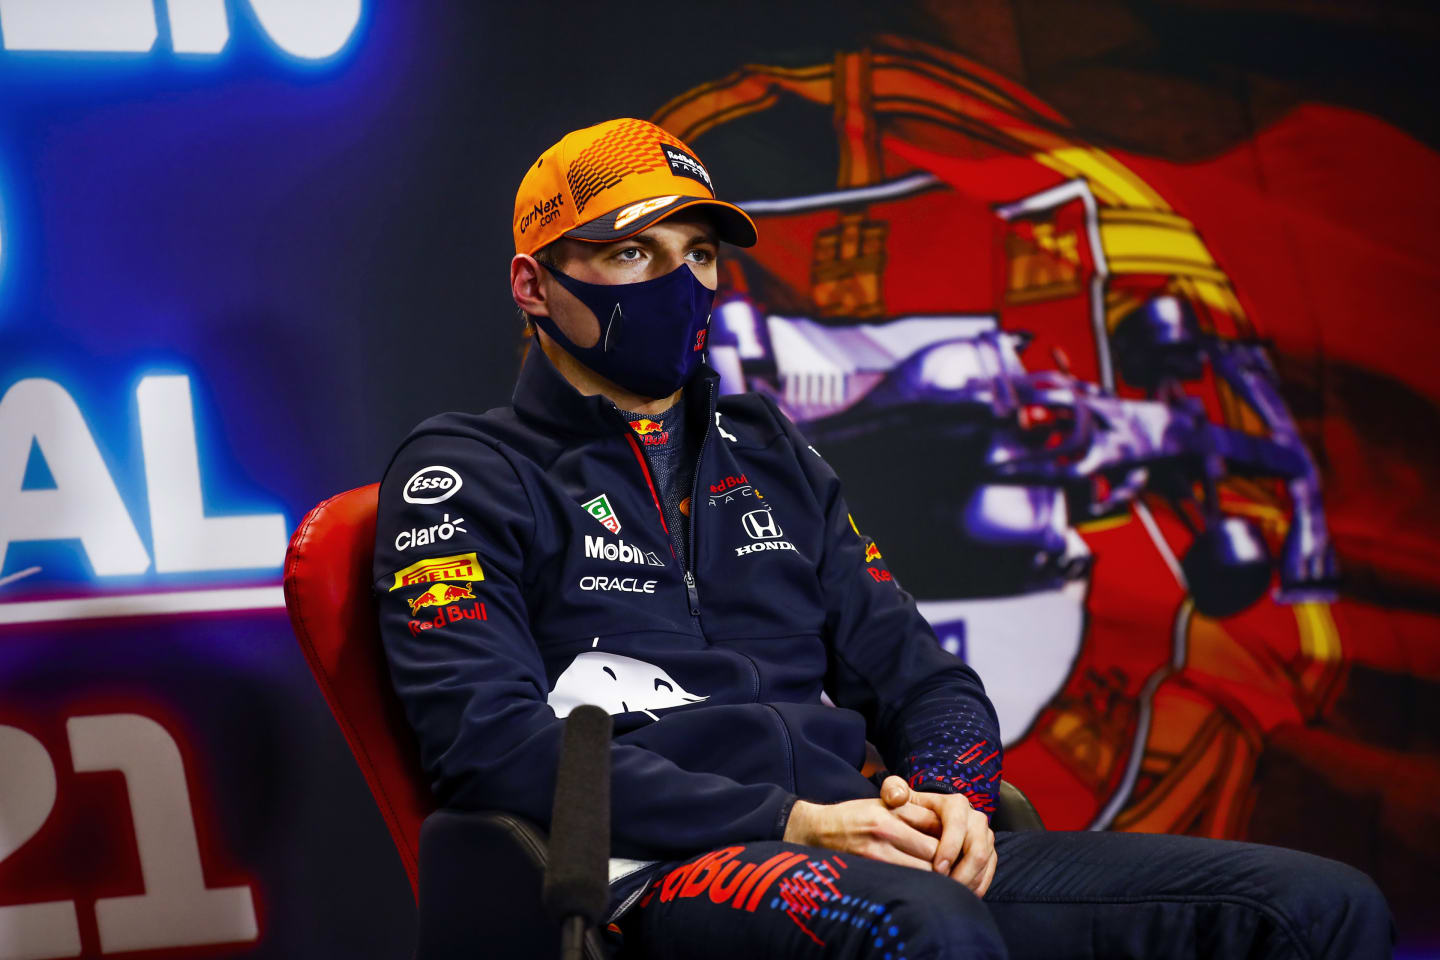 PORTIMAO, PORTUGAL - MAY 01: Third placed qualifier Max Verstappen of Netherlands and Red Bull Racing talks during a Press Conference after qualifying for the F1 Grand Prix of Portugal at Autodromo Internacional Do Algarve on May 01, 2021 in Portimao, Portugal. (Photo by Xavier Bonilla - Pool/Getty Images)